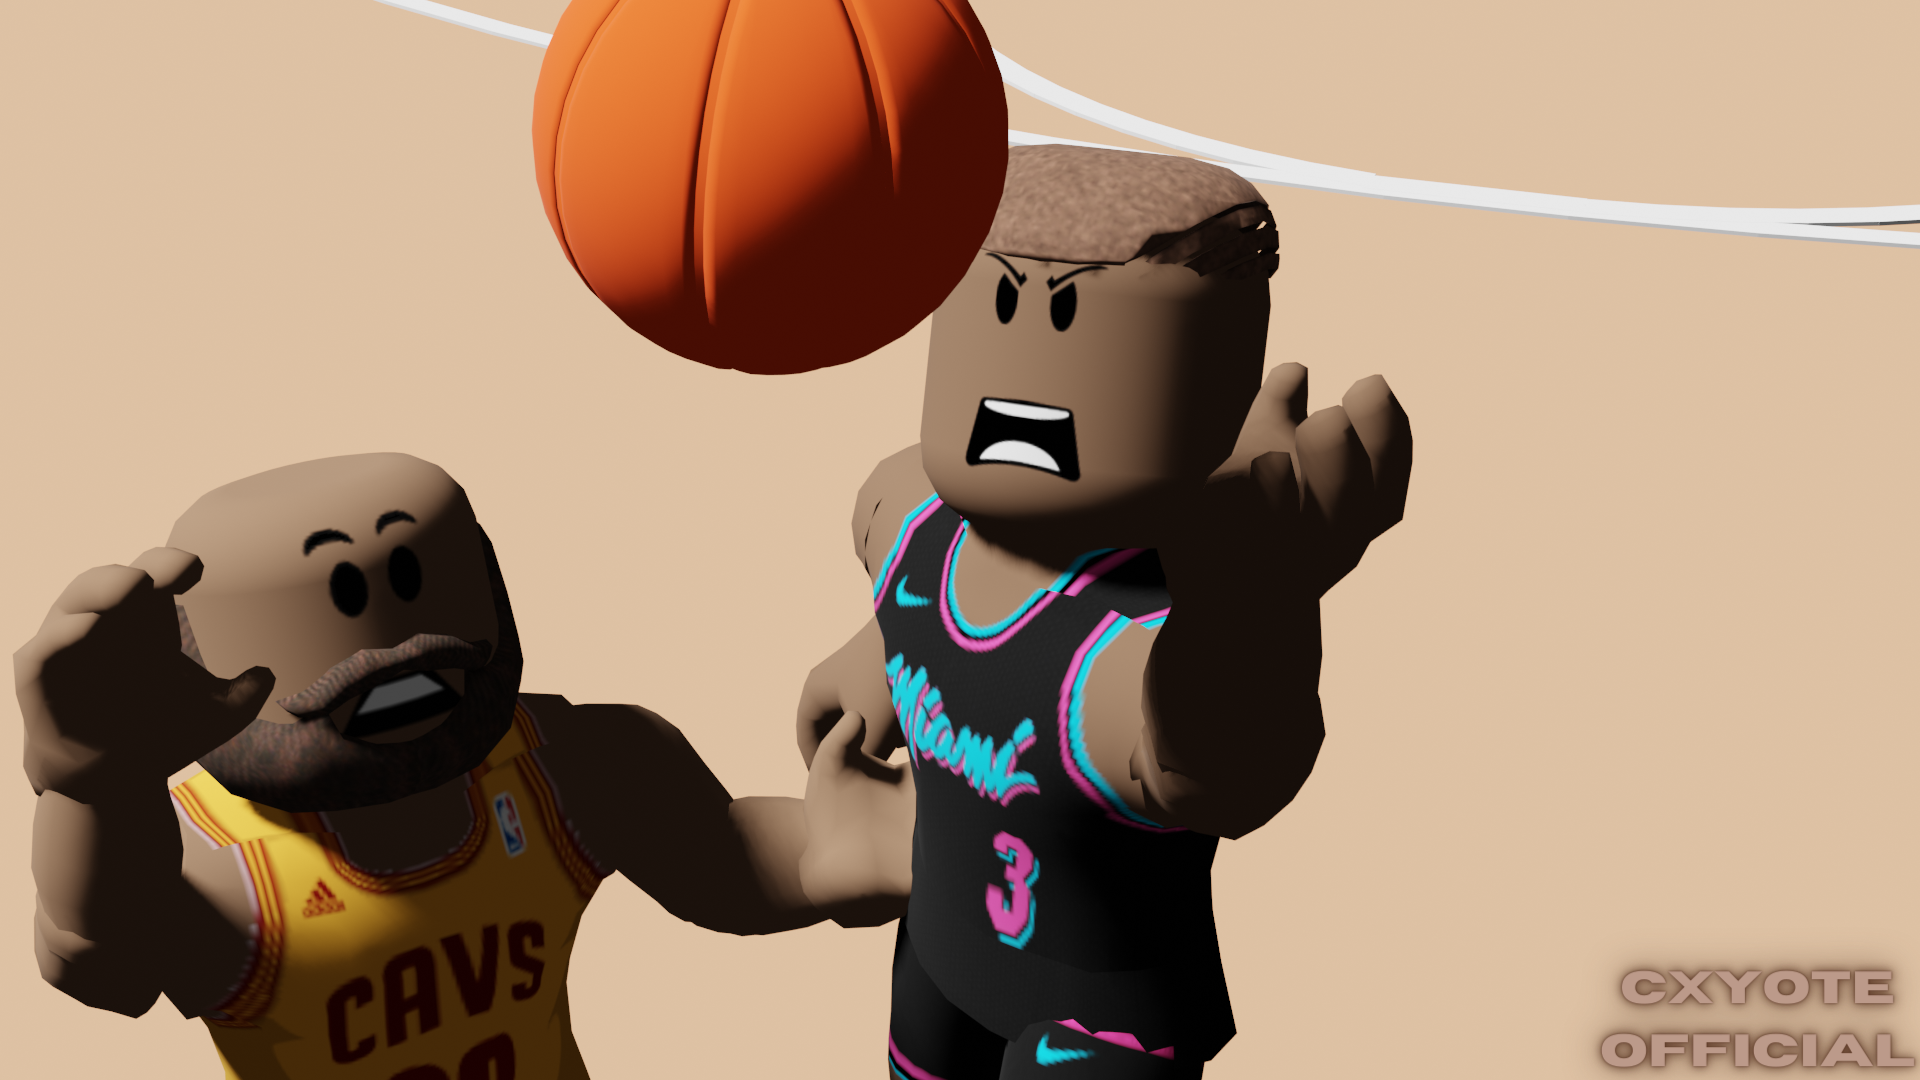 Twitter 上的Cxyote：GFX i made for my Roblox basketball game, #RobloxDev # roblox #GFX #blender #robloxdeveloper